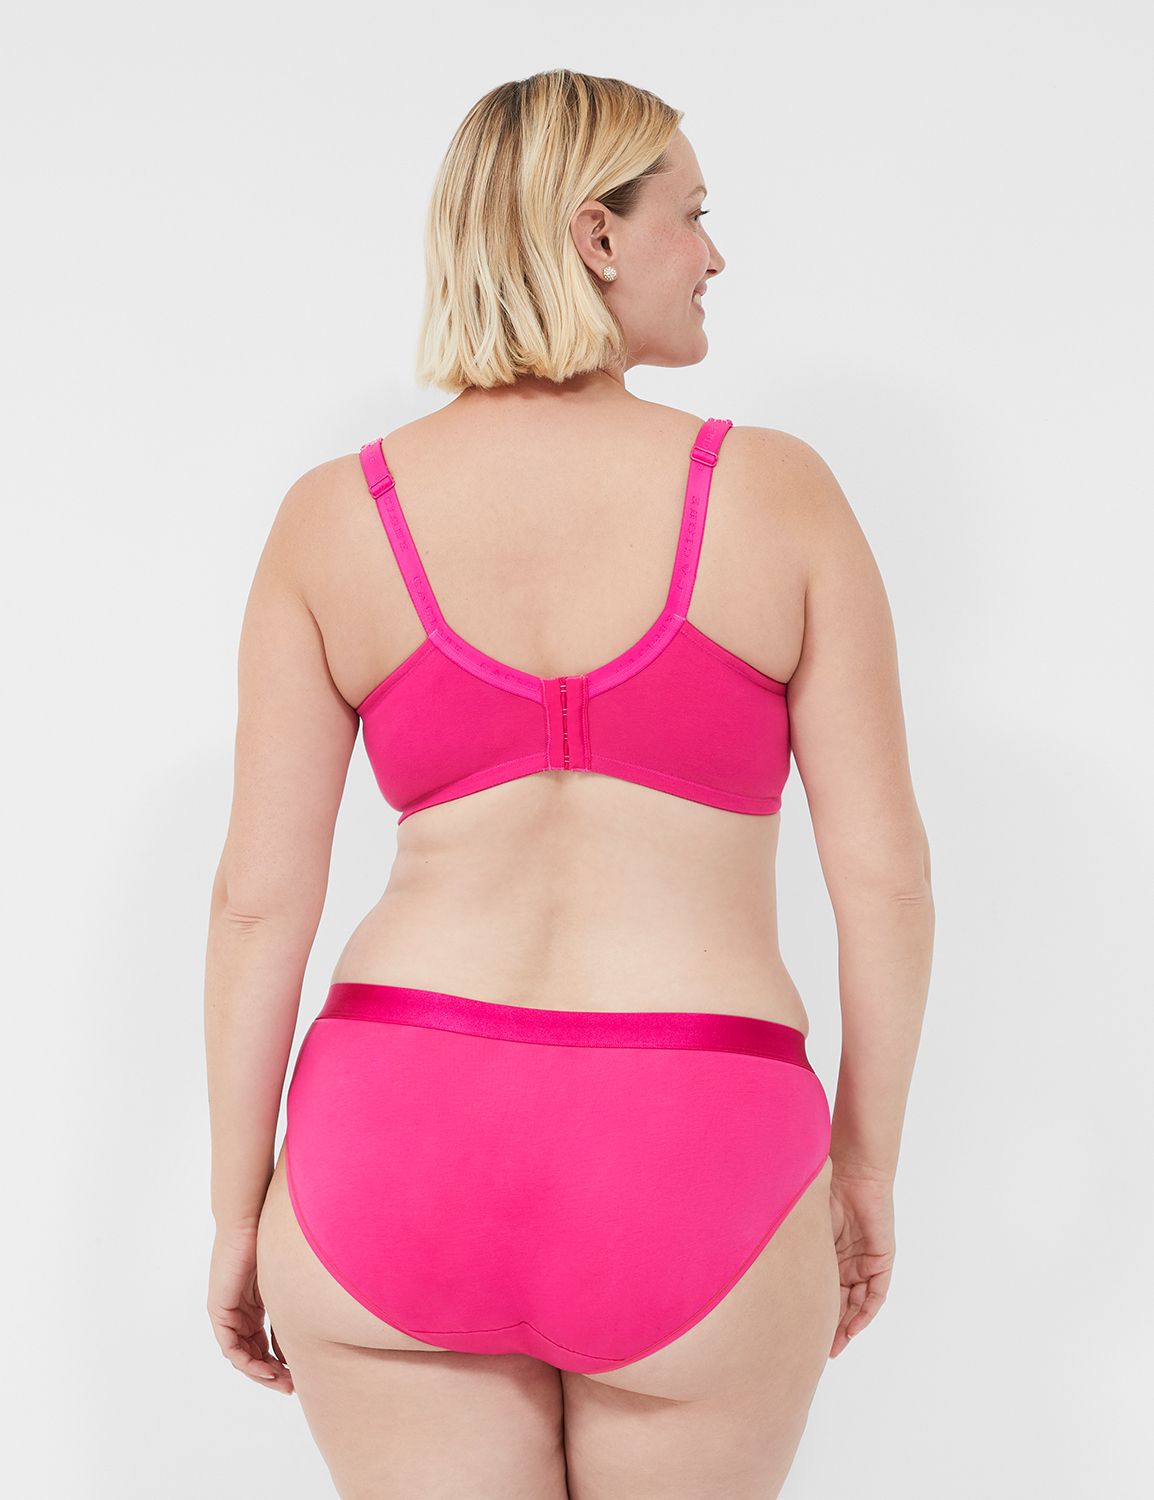 Unbranded Pink Plus Size Panties for Women